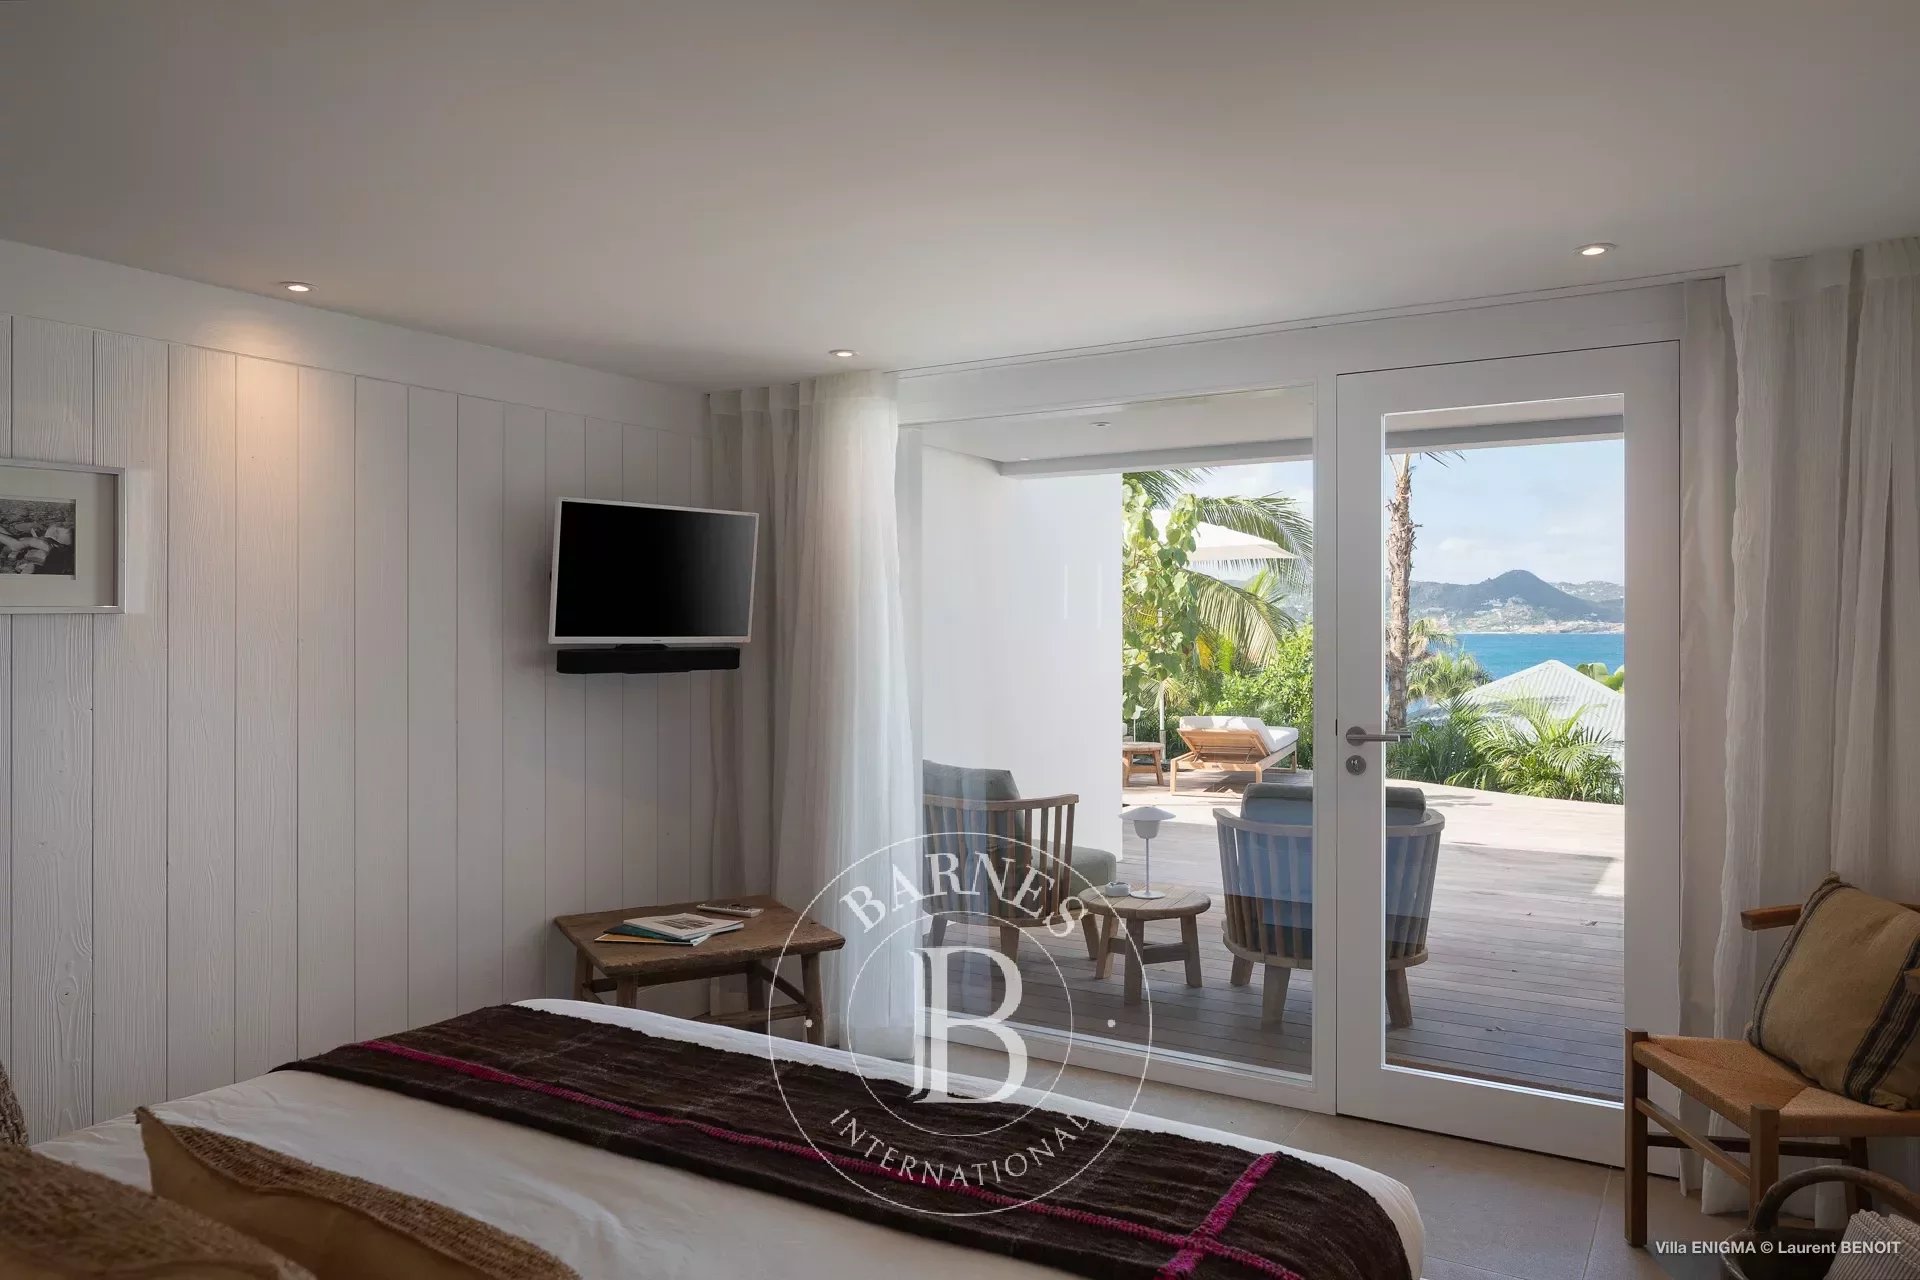 4 -Bedroom Villa in St.Barths - picture 13 title=